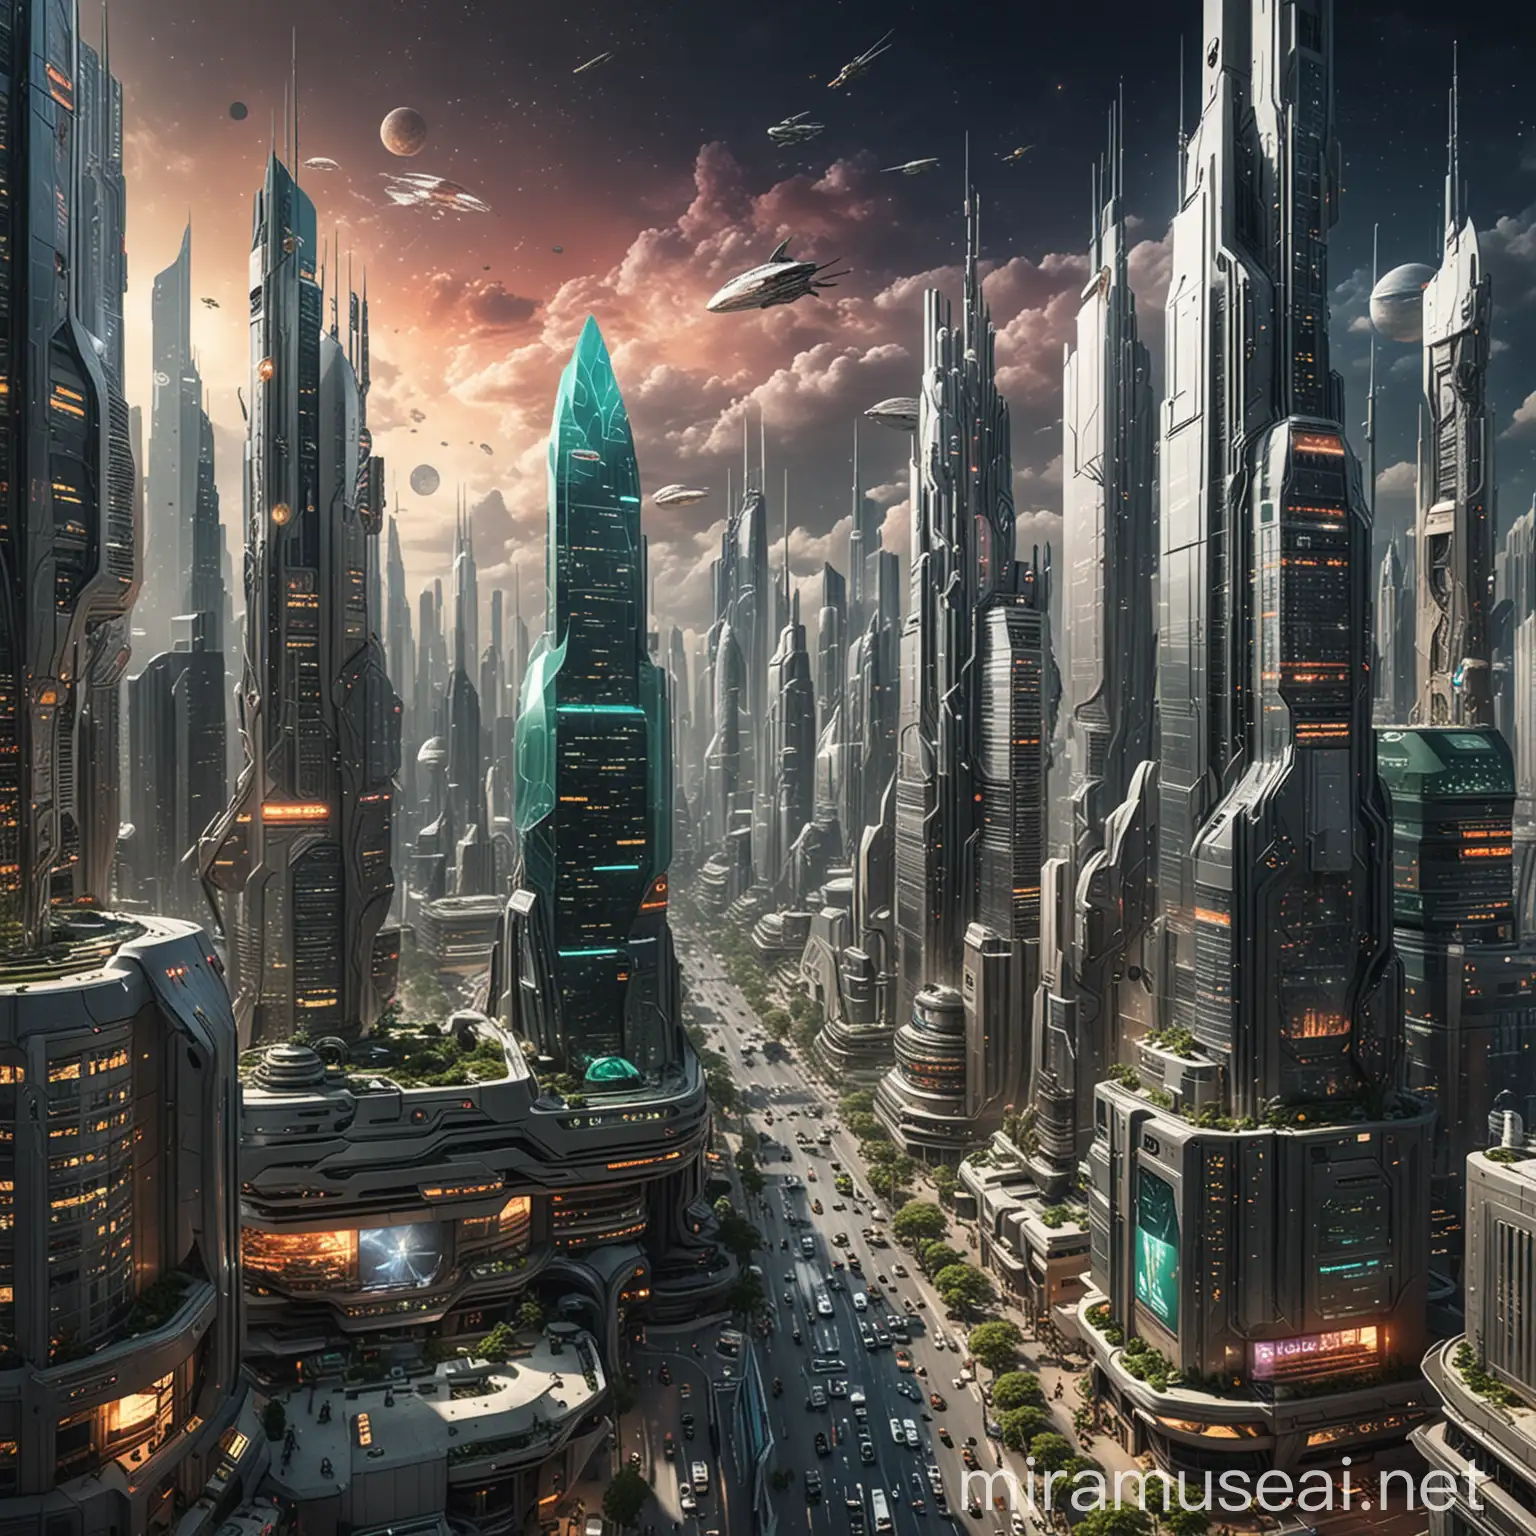 Make a CBD of a futuristic space colony. Include things like High-rise buildings, futuristic office complexes, bustling streets with space vehicles, holographic advertisements.